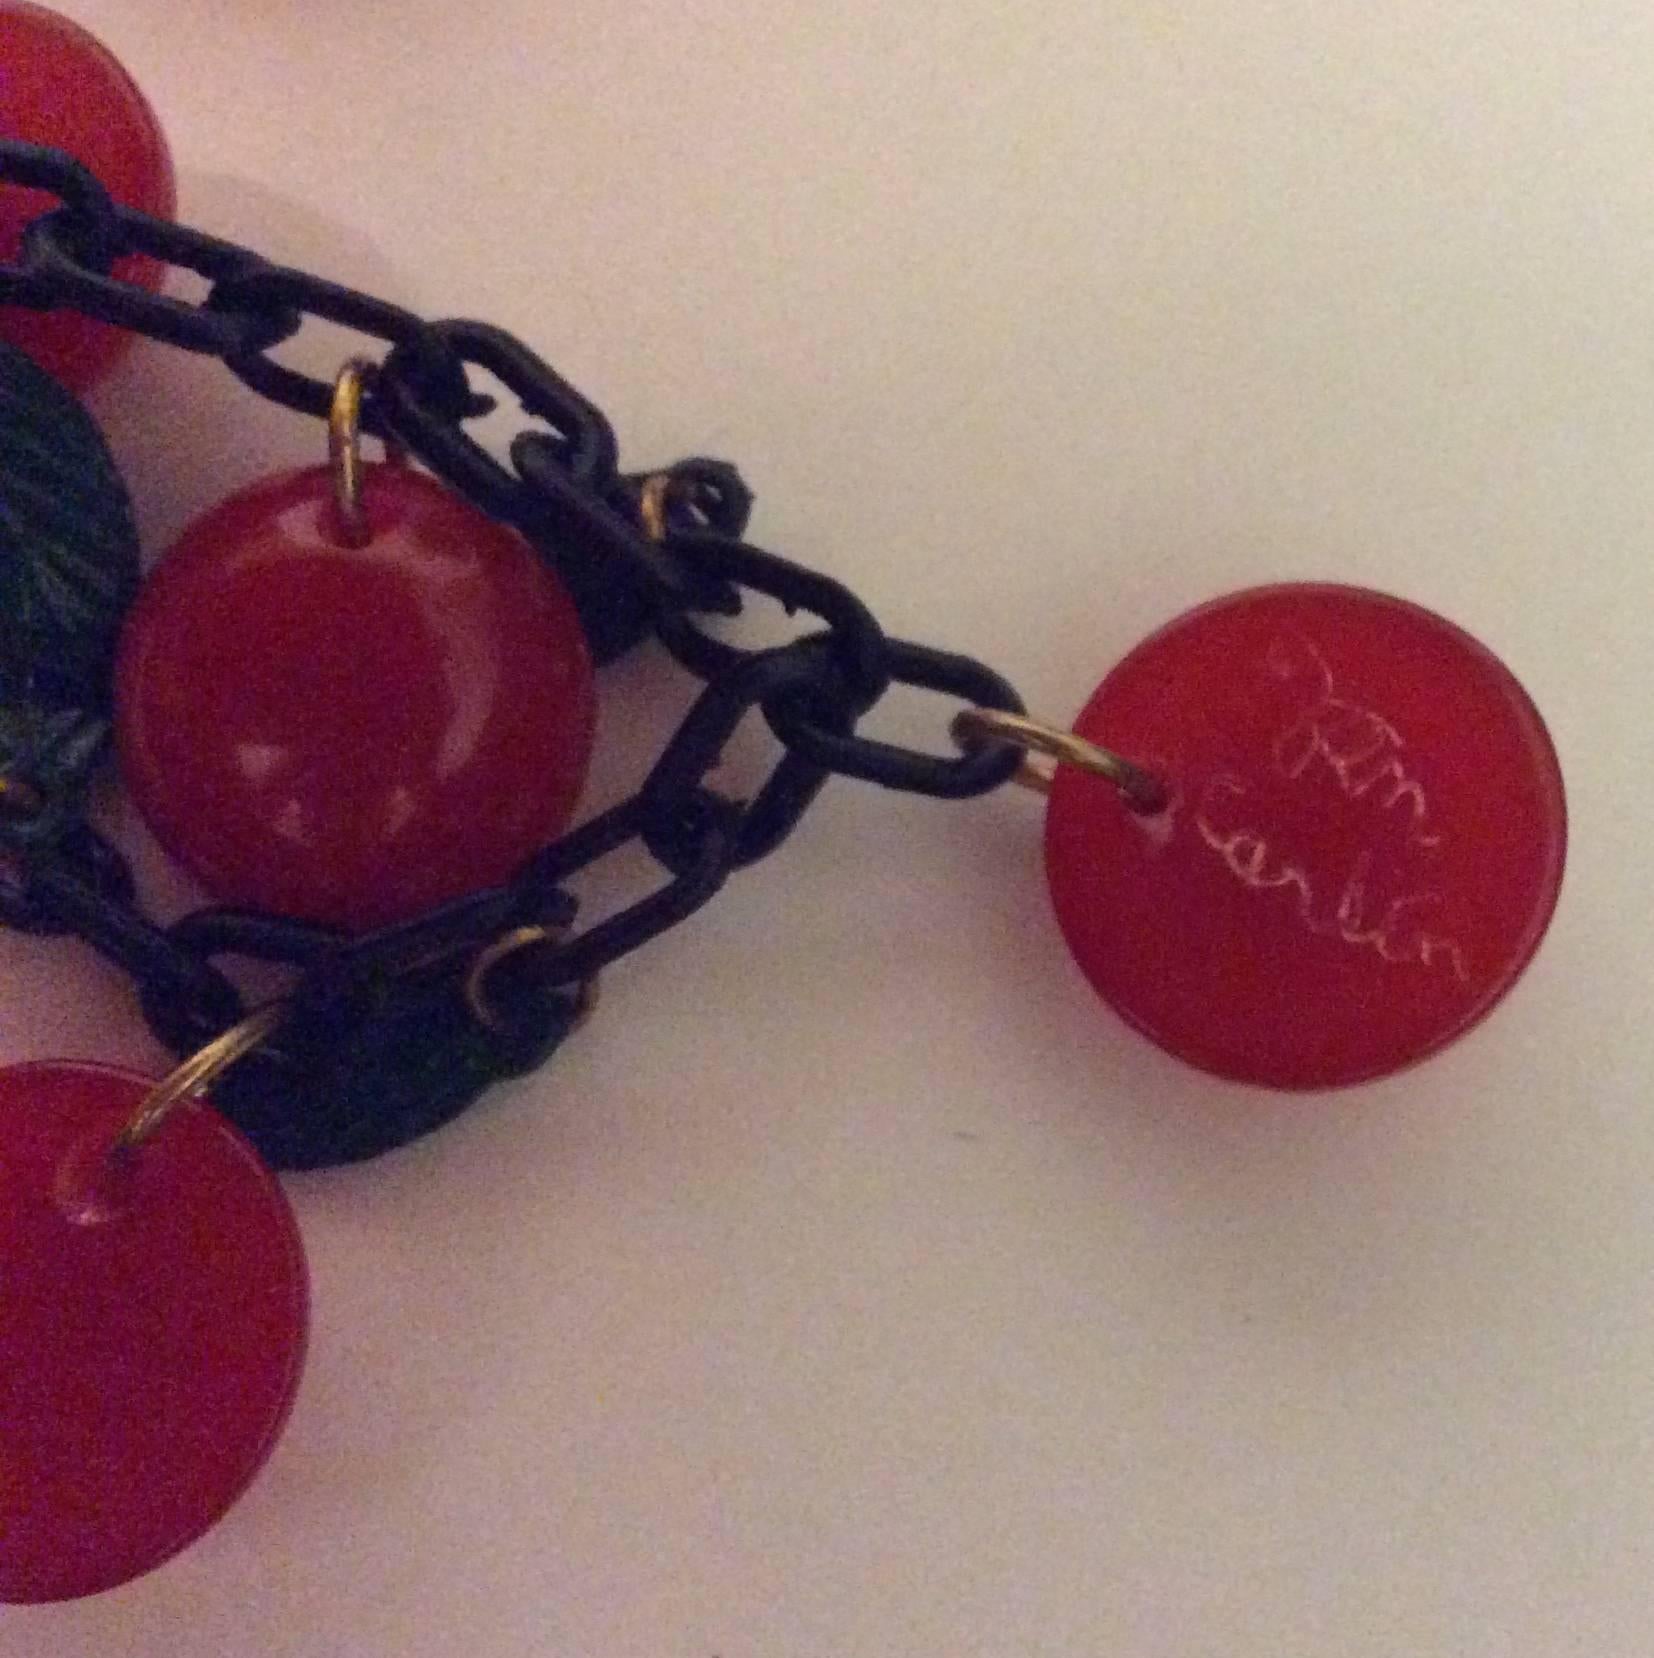 This beautiful cherry necklace with matching earrings is a gorgeous example of bakelite jewelry at its very finest. The earrings are clip-on cherries and the necklace is a series of leaf and cherry charms on a black chain. The set is signed by the